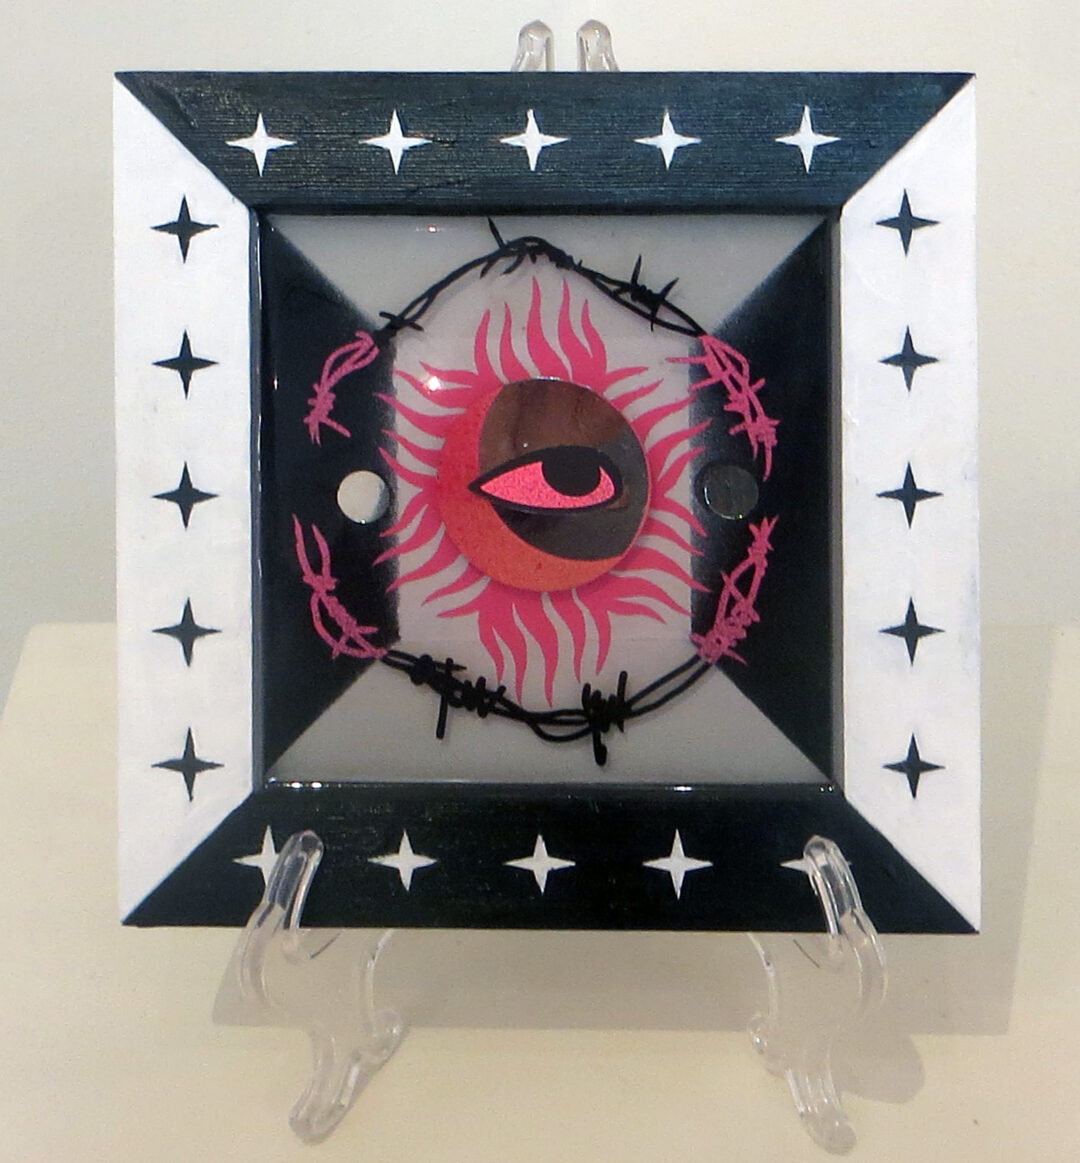 Erin Kuhn “Break Every Chain” mixed media, resin, mirrors, hand painted and cut paper on wood,  8” x 8” x 1”- $350.00